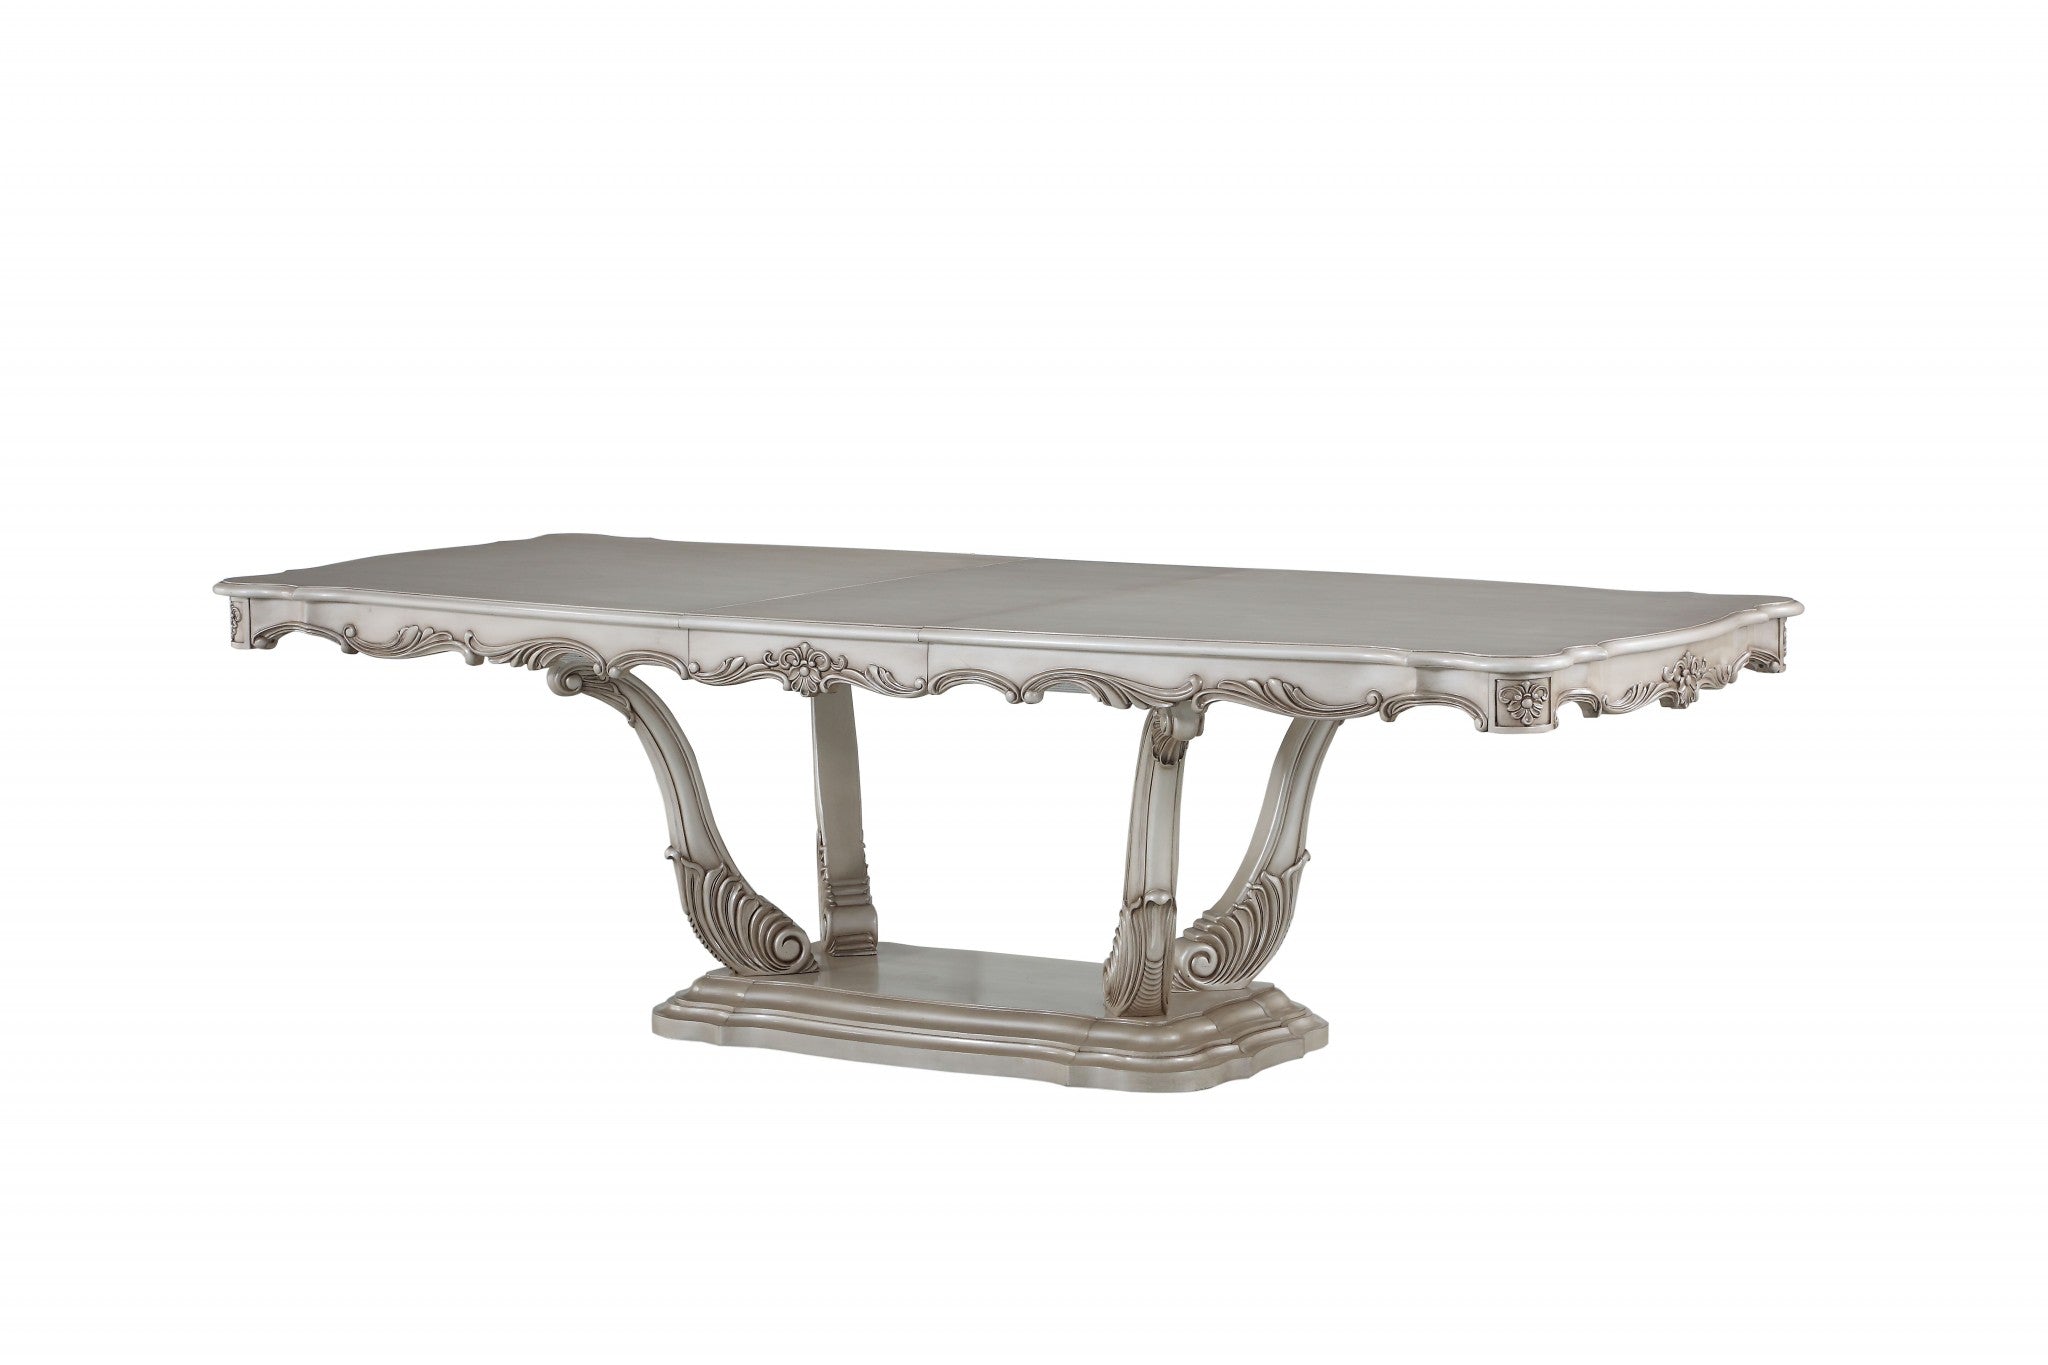 44" Off White Solid Wood Dining Table